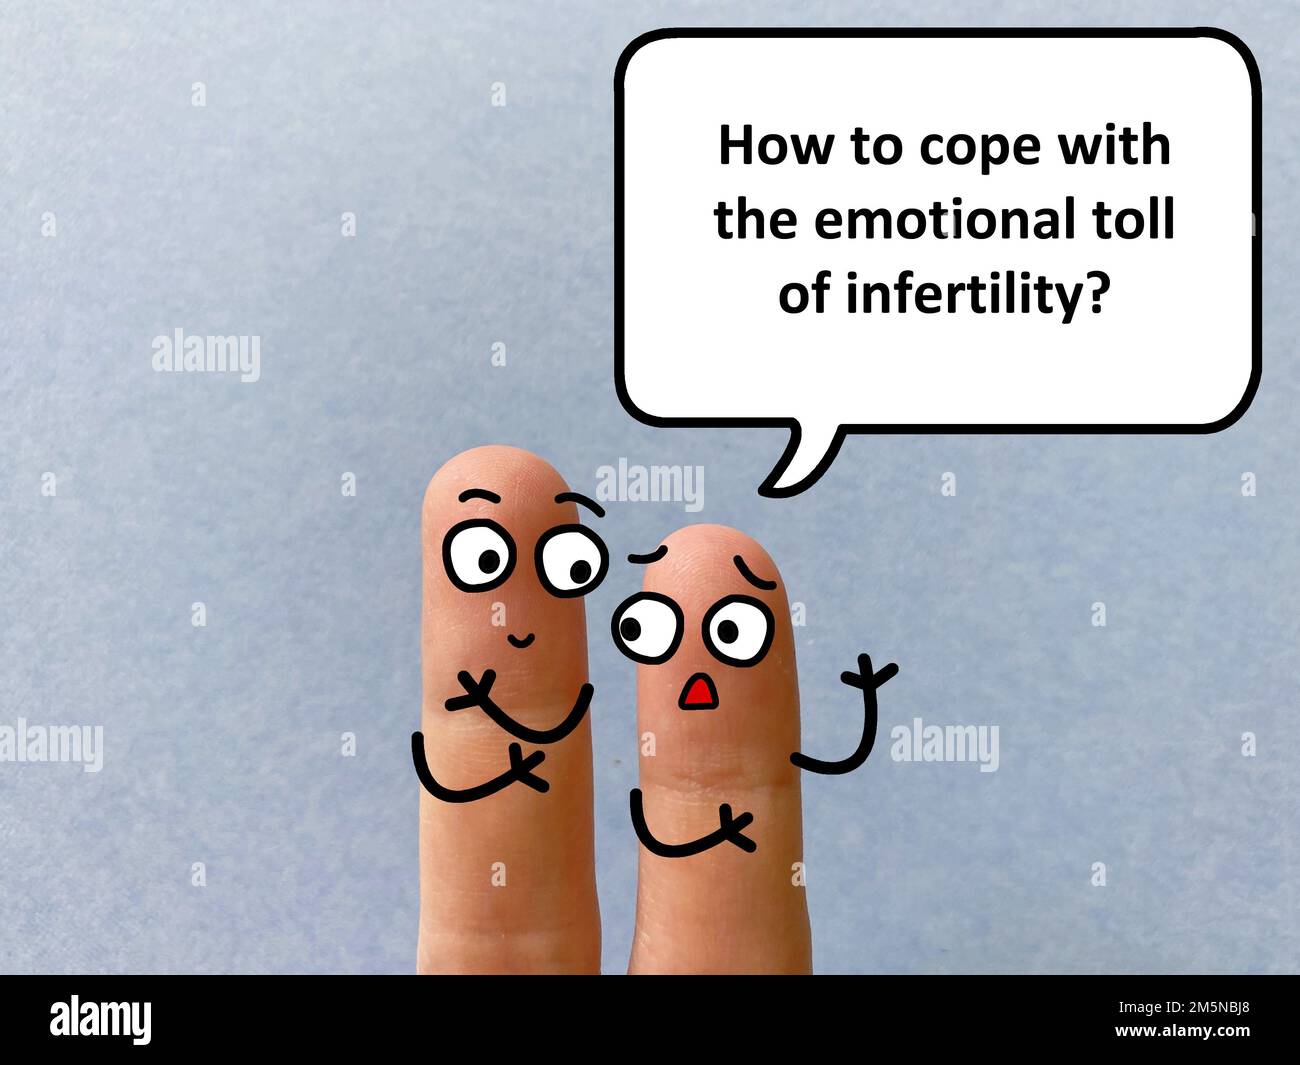 Two fingers are decorated as two person. One of them is asking how to cope with the emotional toll of infertility. Stock Photo